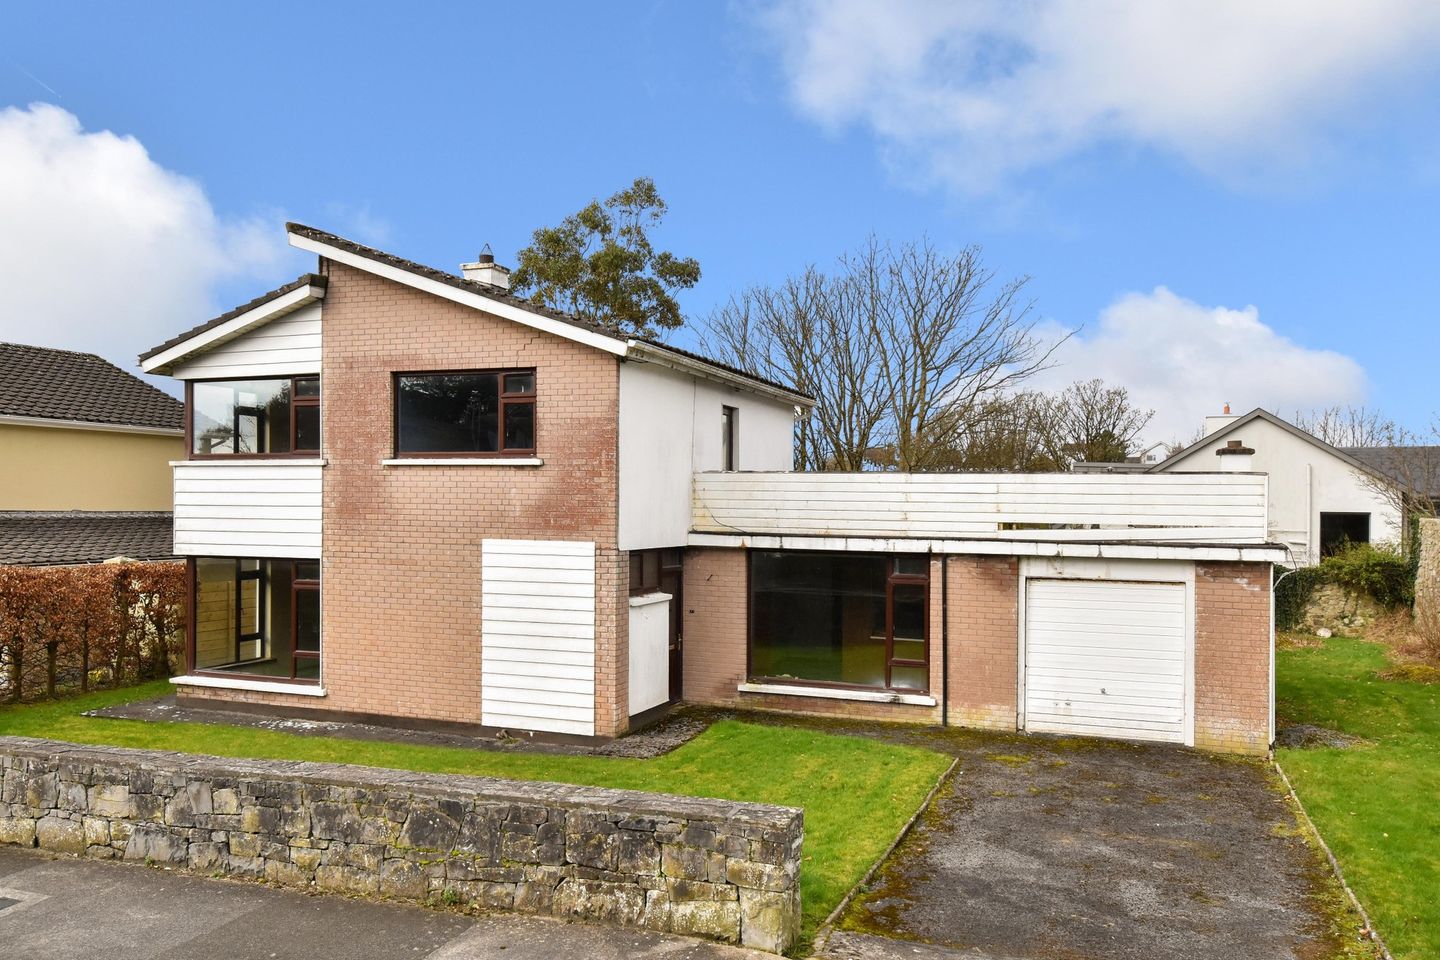 13 Pollnarooma West, Salthill, Co. Galway, H91NTD8